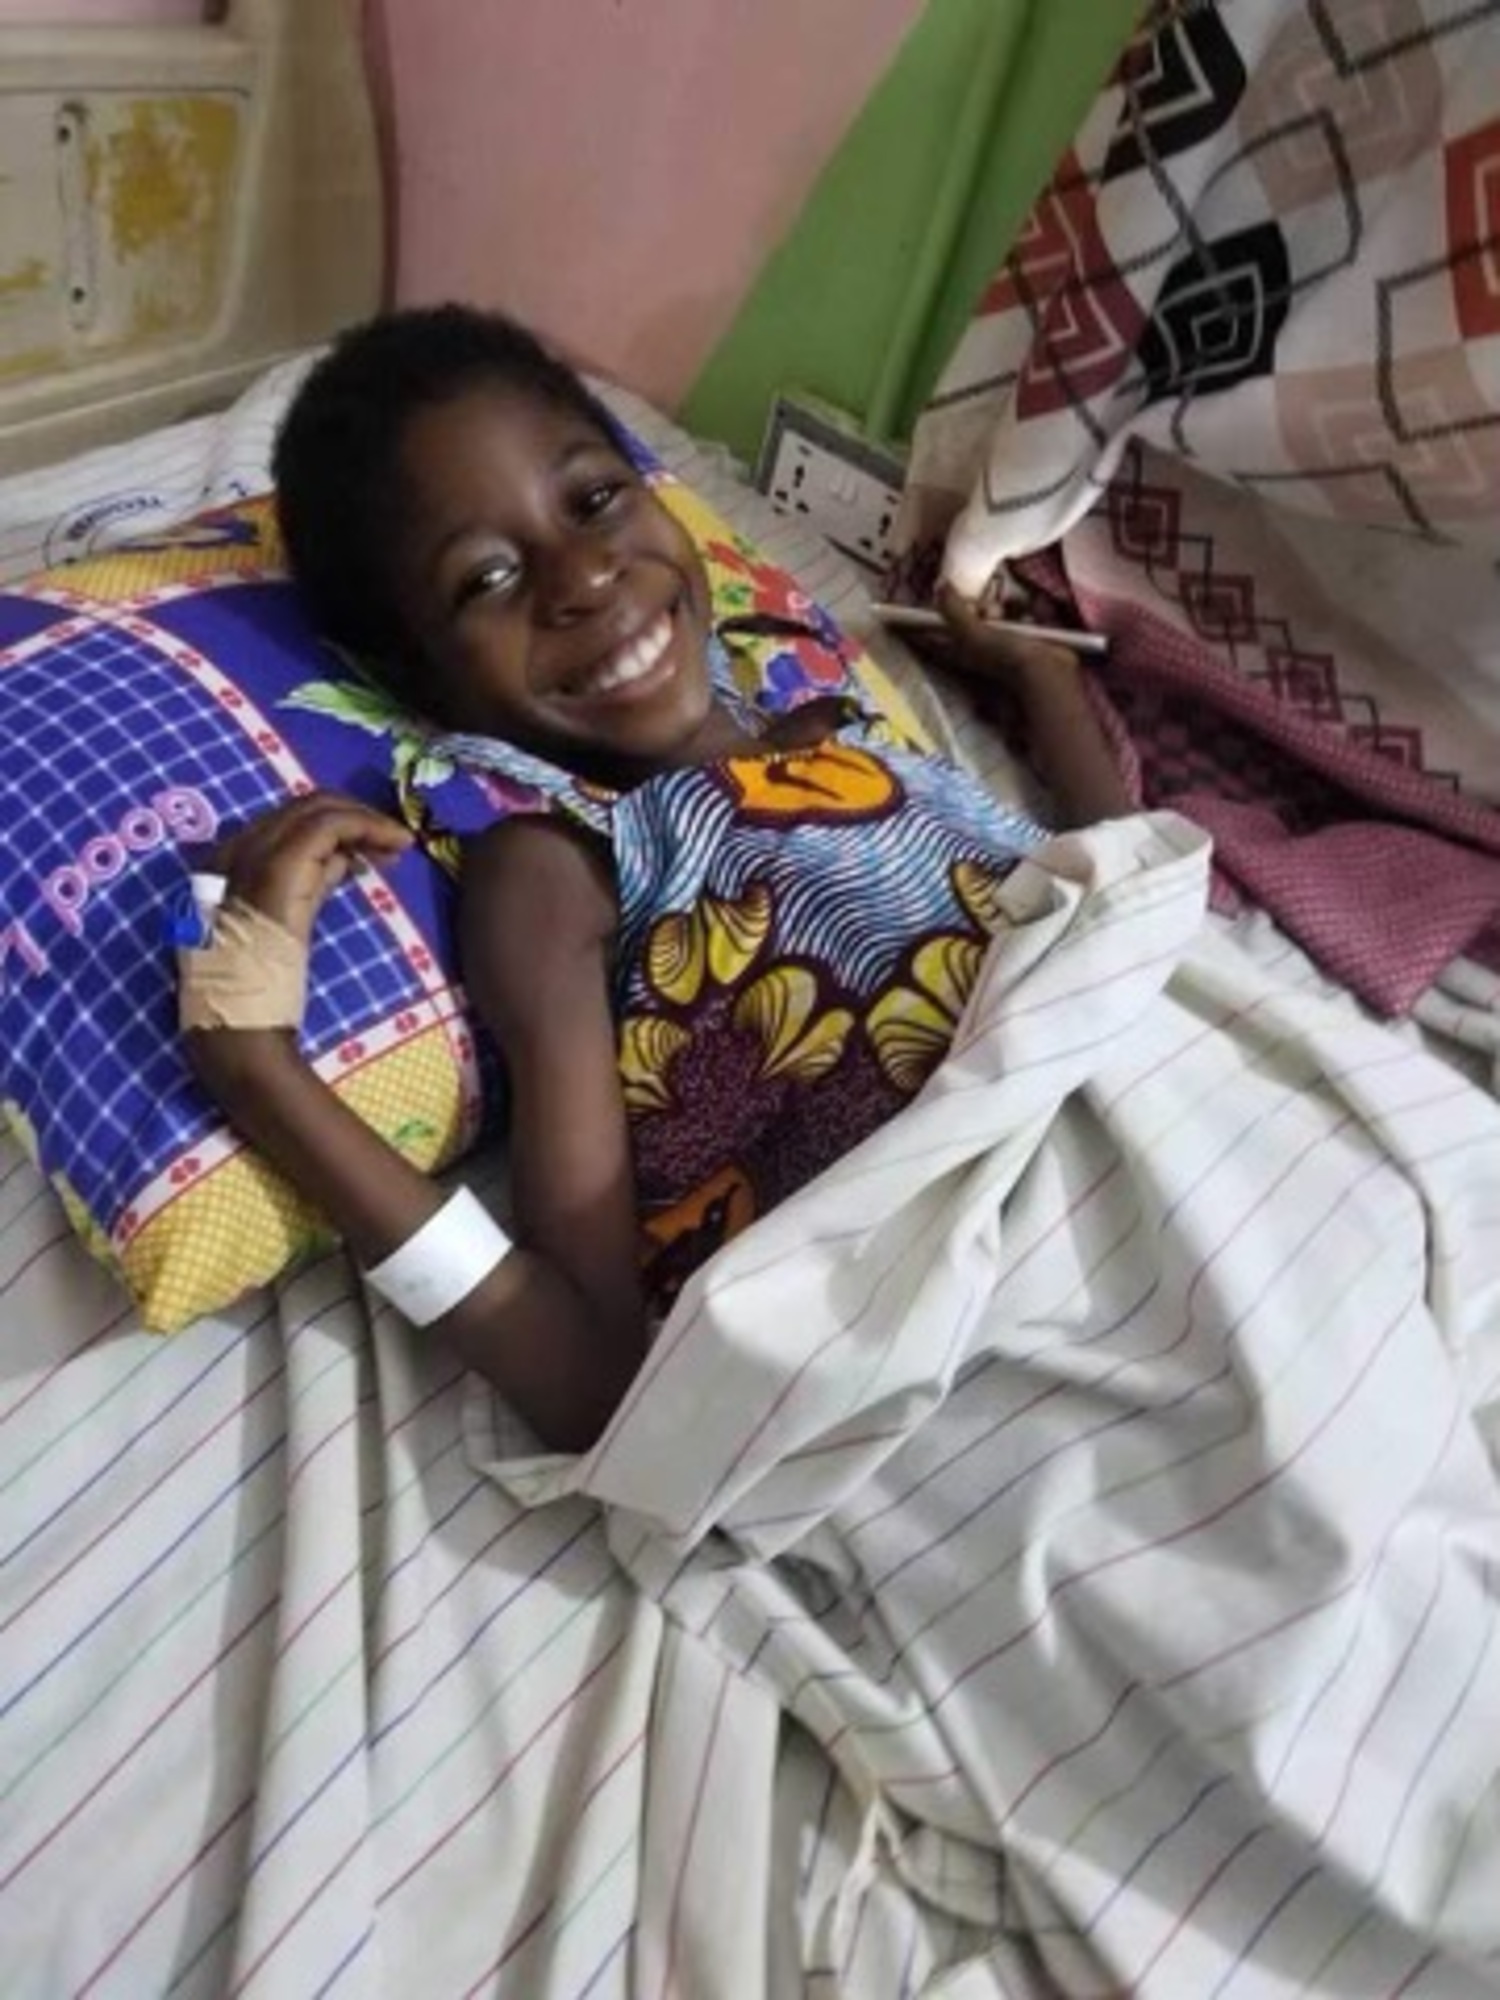 Eight-year-old Sonia was all smiles after having surgery to have a large abdominal tumor removed. She had been unable to go to school and was being bullied during the four years she was living with the tumor. The team of doctors from New York completed the surgery during a trip to Ghana earlier this month.